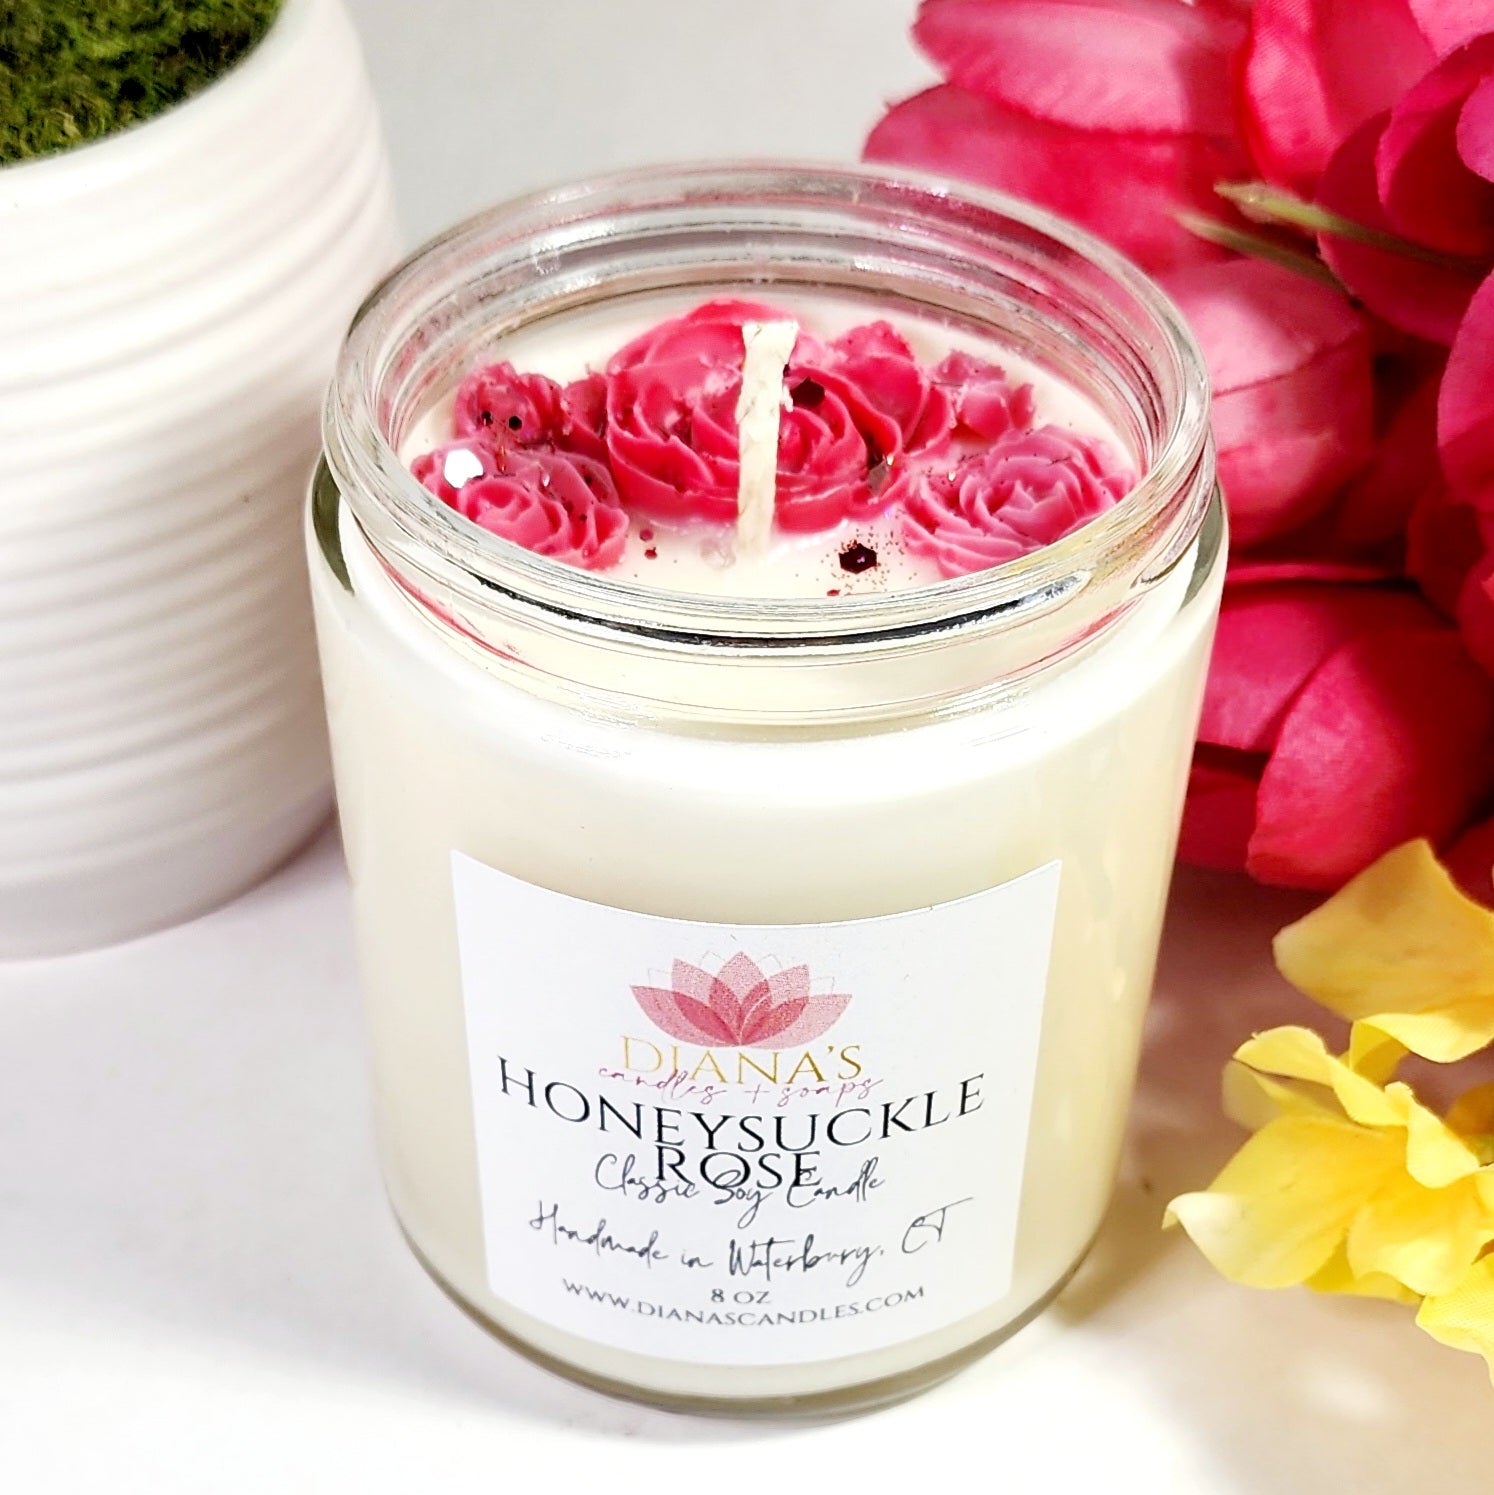 Honeysuckle Rose Candle Diana's Candles and Soaps 